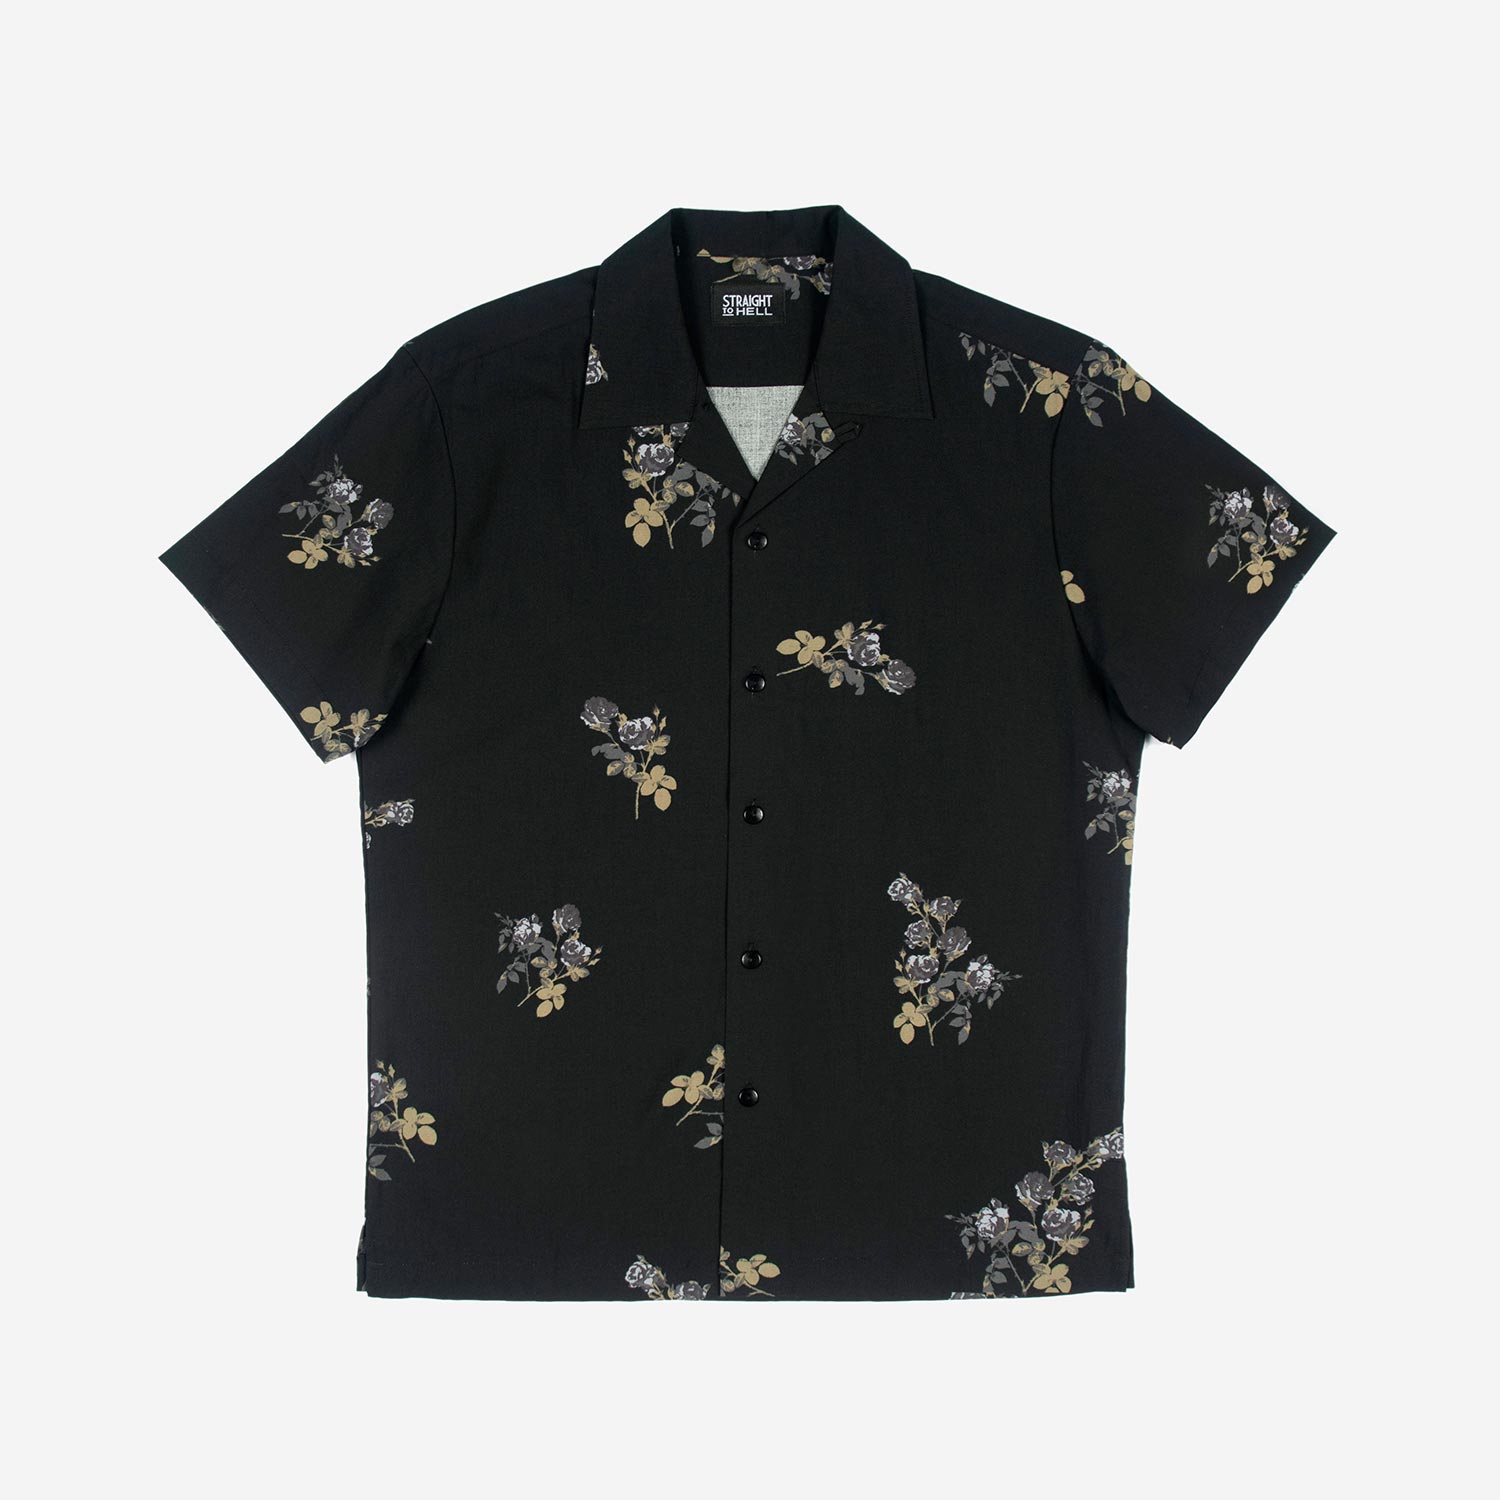 Band of Roses - Black and Grey Floral Print Shirt (Size XS, S, M, XL, 2XL,  3XL, 4XL)